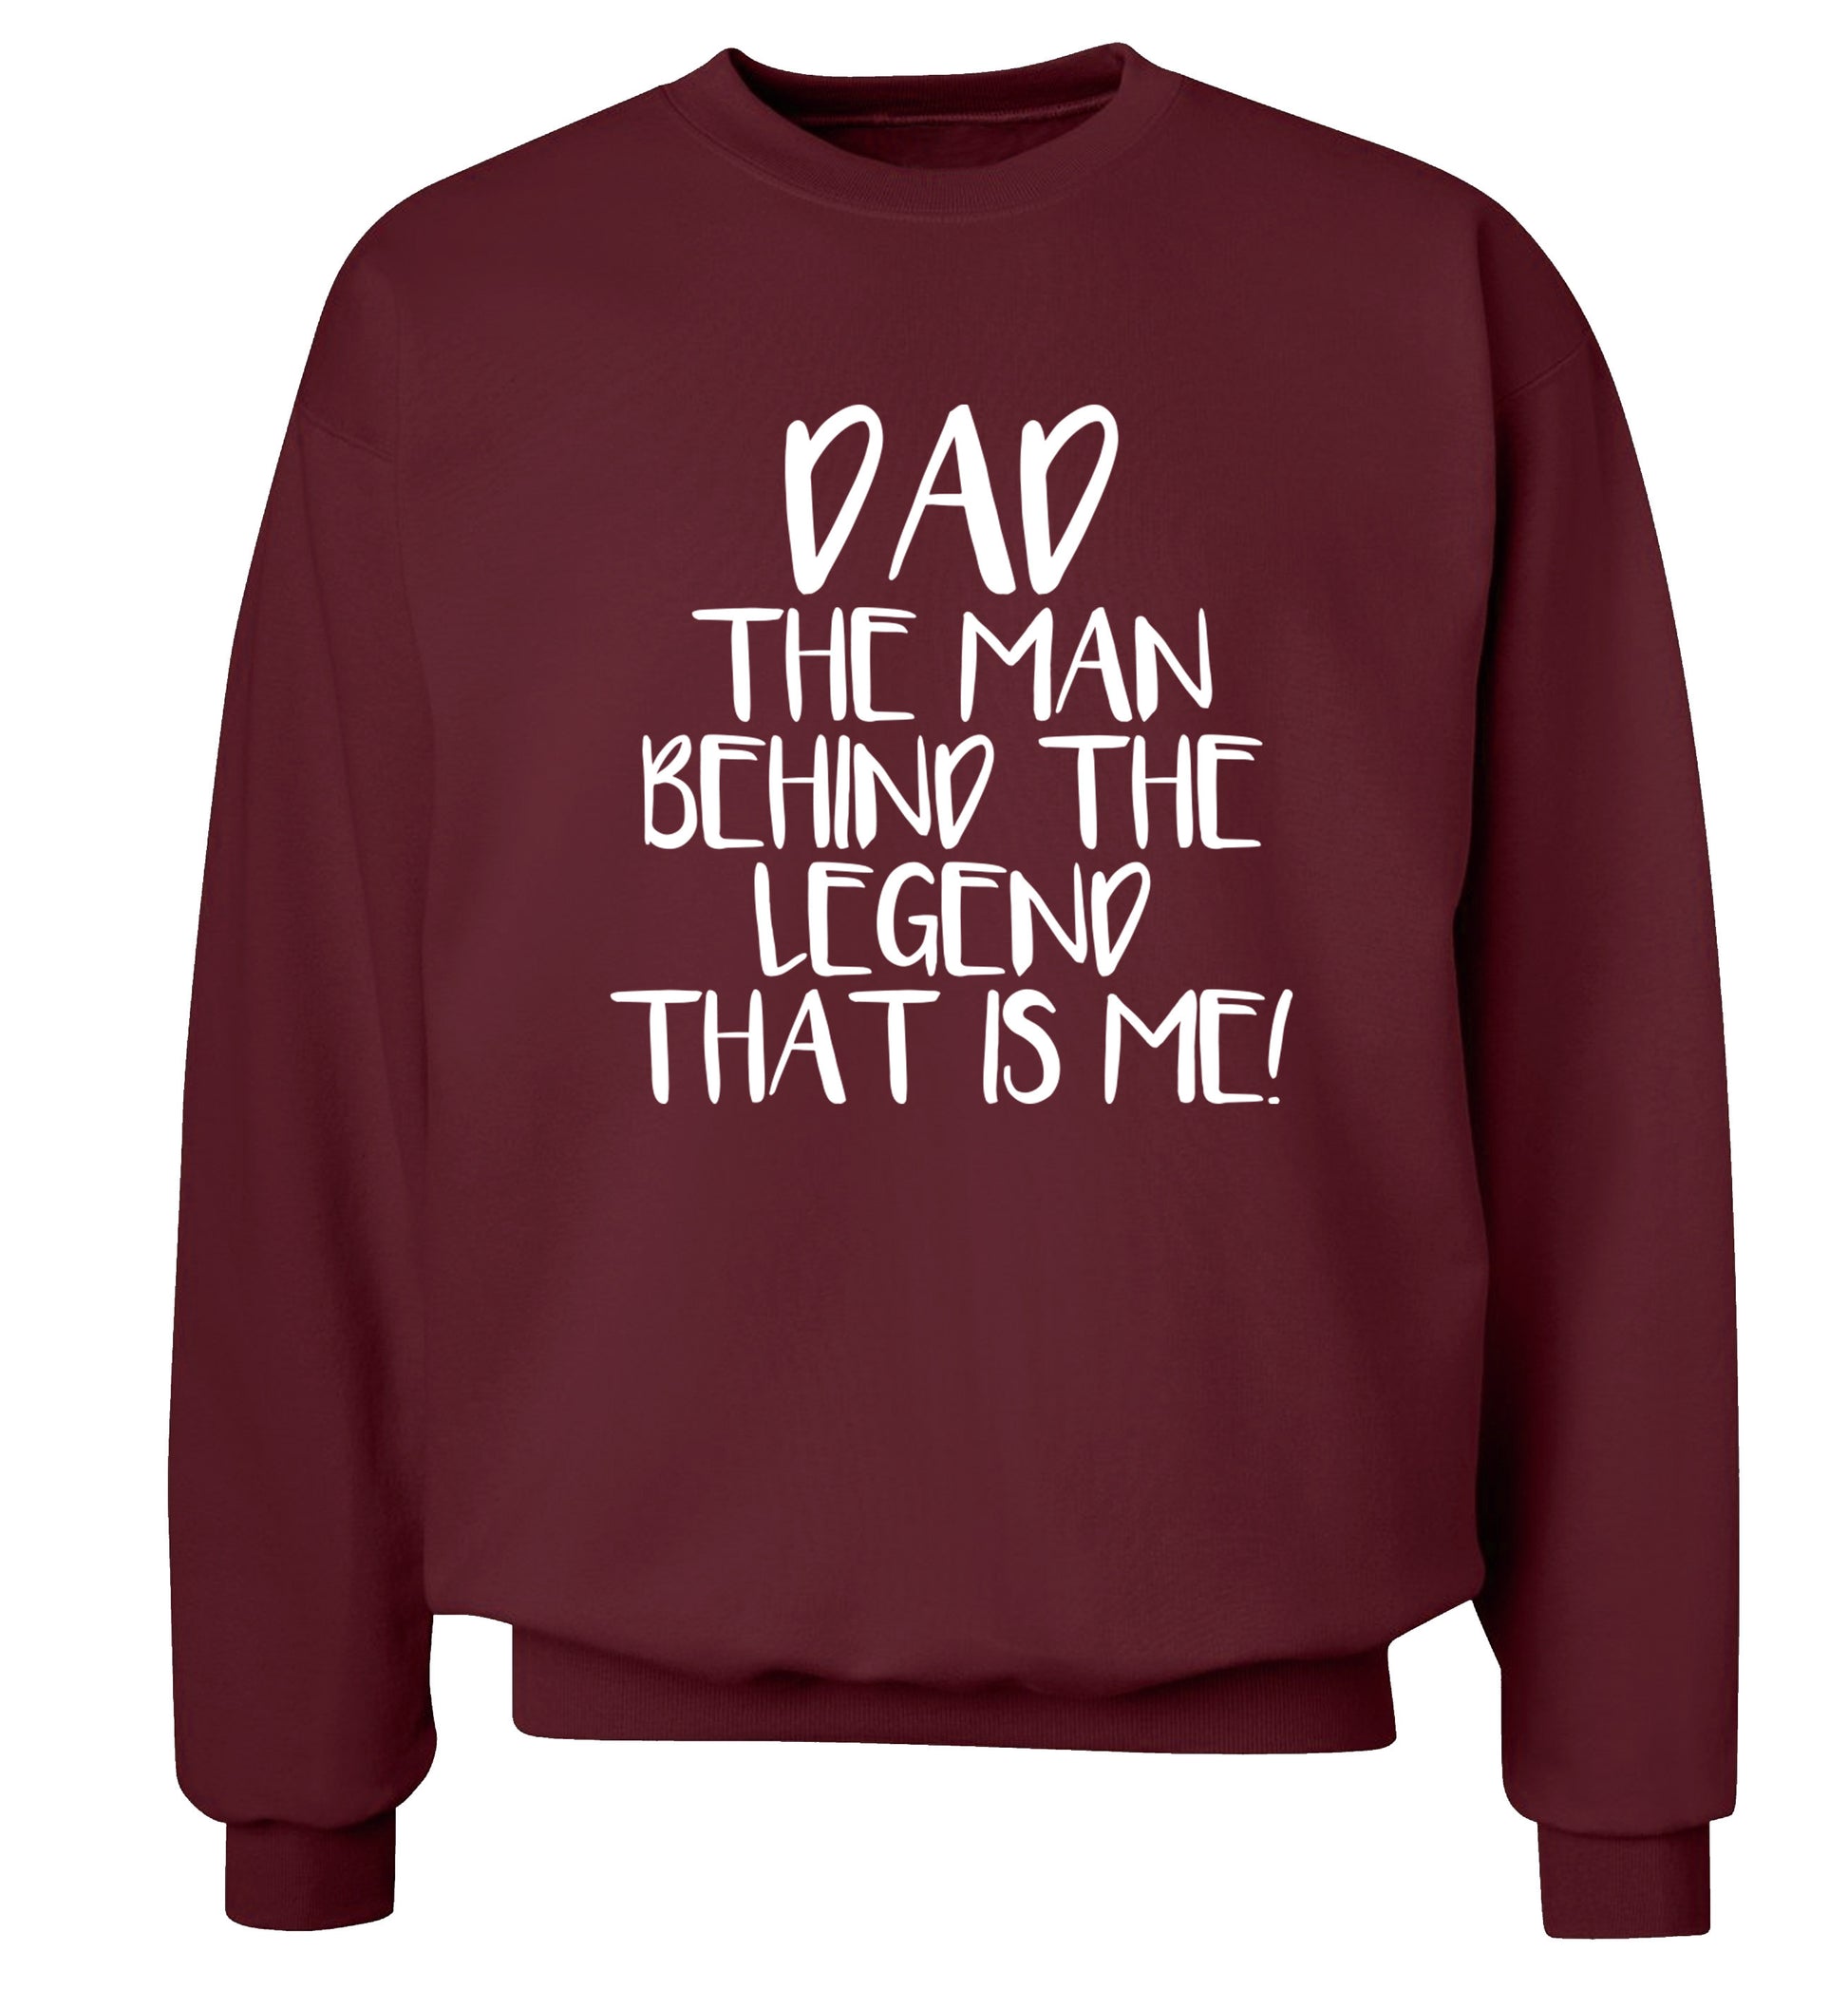 Dad the man behind the legend that is me! Adult's unisex maroon Sweater 2XL